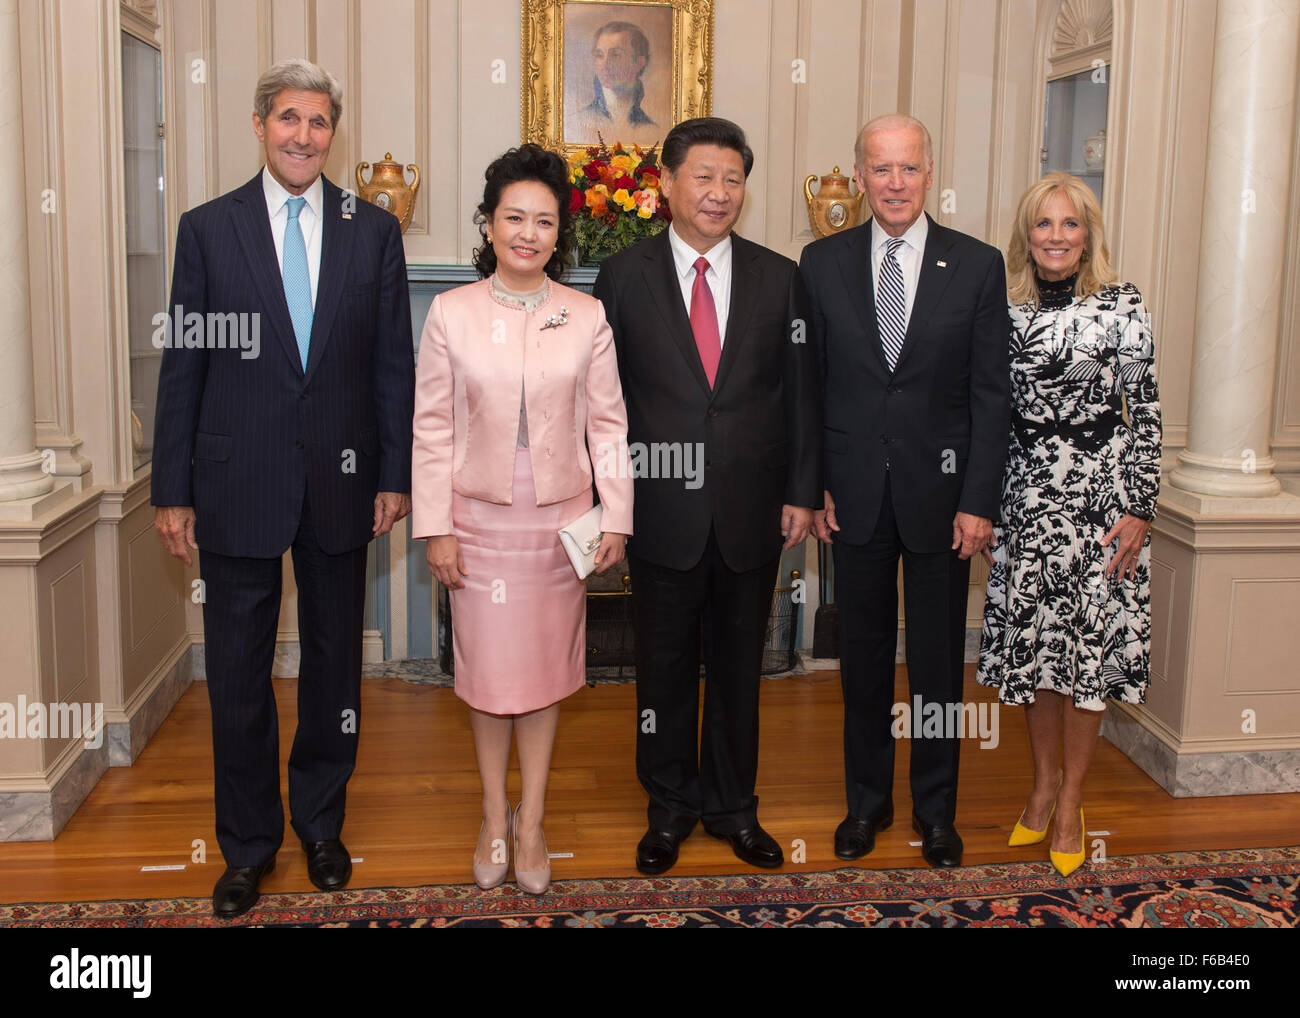 Secretary Kerry Poses for a Photo With Dr. Biden, Vice President Biden, Chinese President Xi, and His Wife, Peng Liyuan Stock Photo